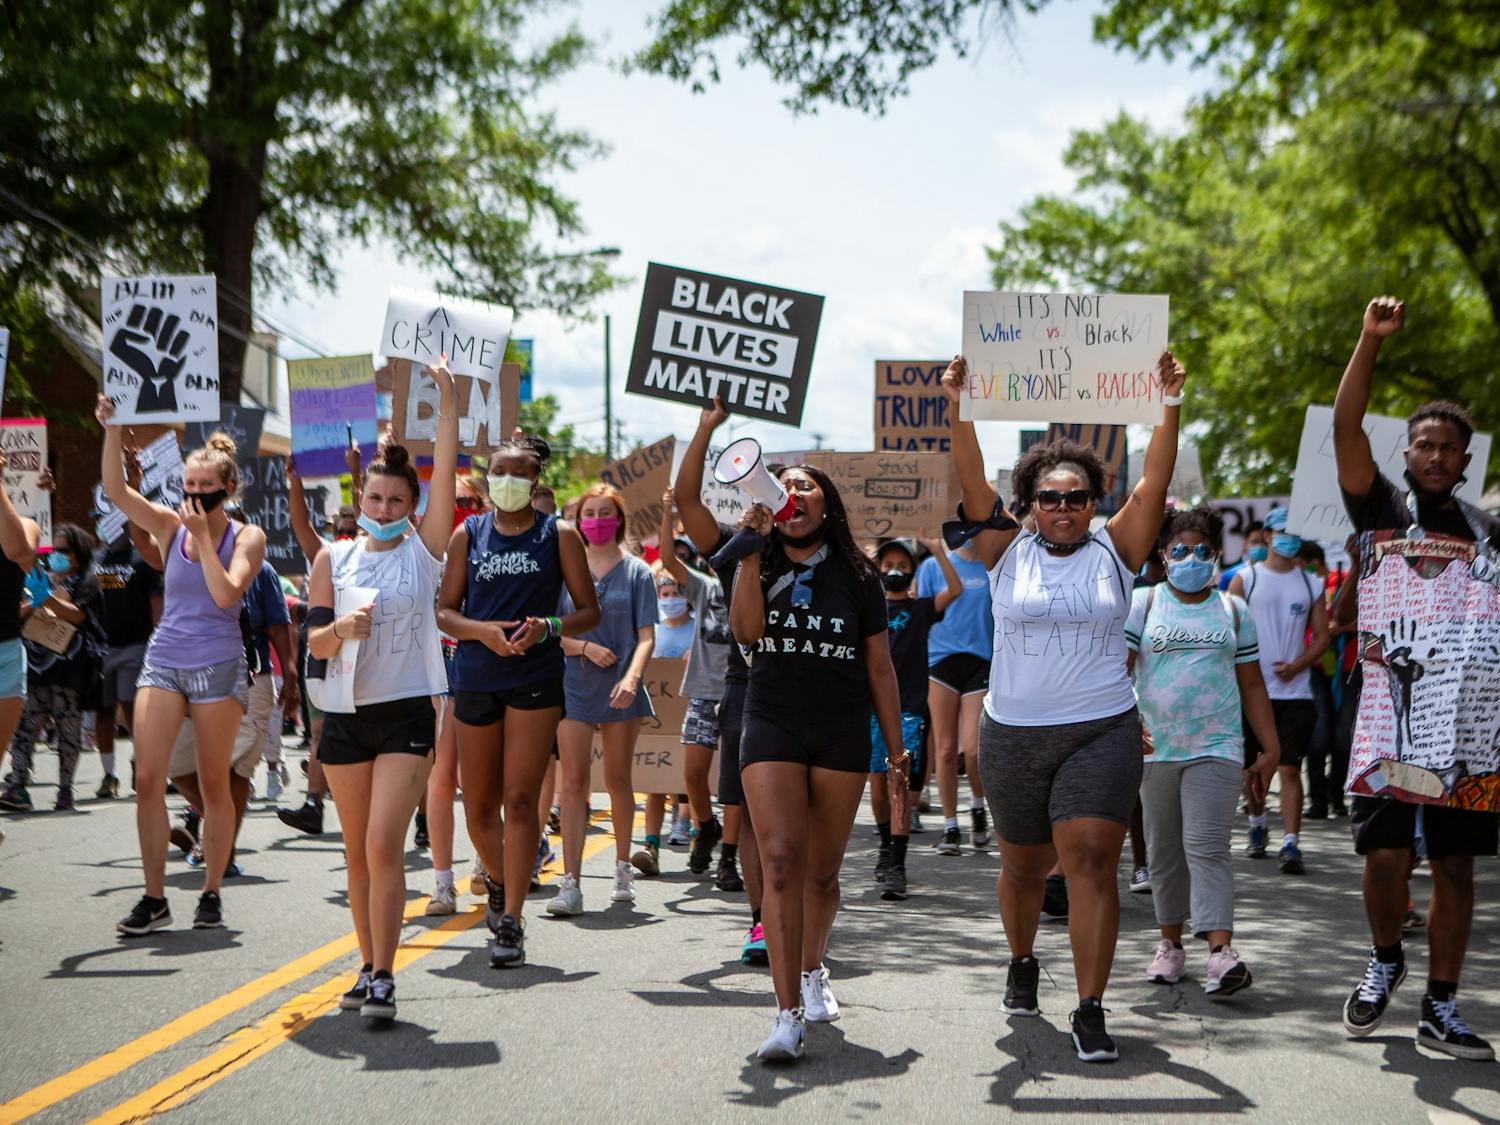 Niya Fearrington (left) and Victoria Fornville (right) lead the crowd at the Chapel Hill Rally for Justice in June. Photo courtesy of Dakota Moyer at Chapelboro.com.